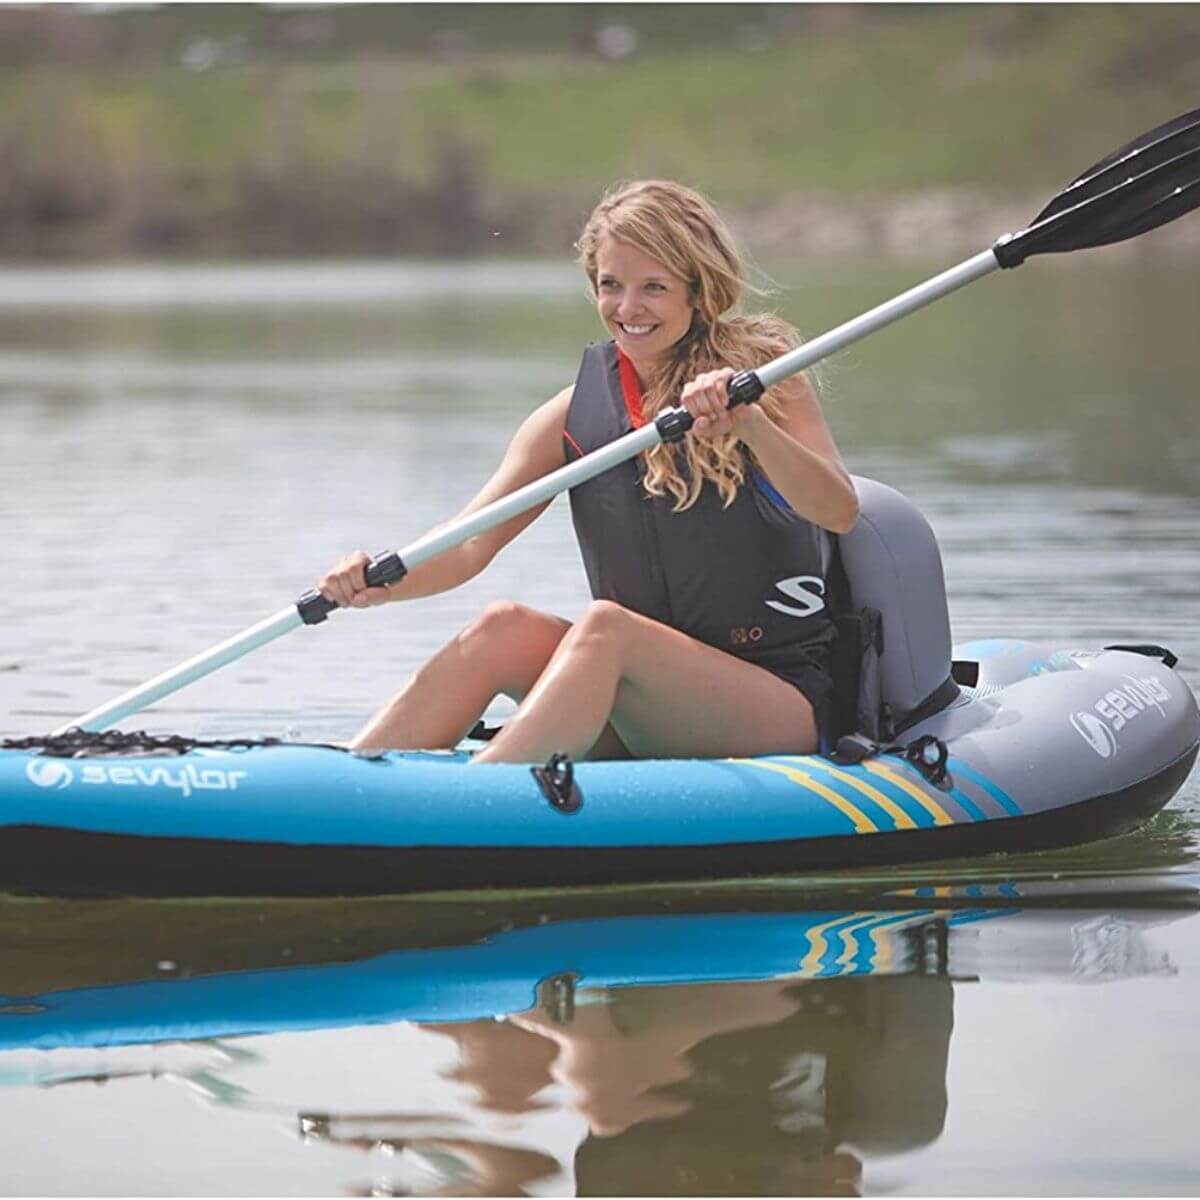 Paddlin' in Style: 5 Best Inflatable Kayaks to Make a Splash This Summer